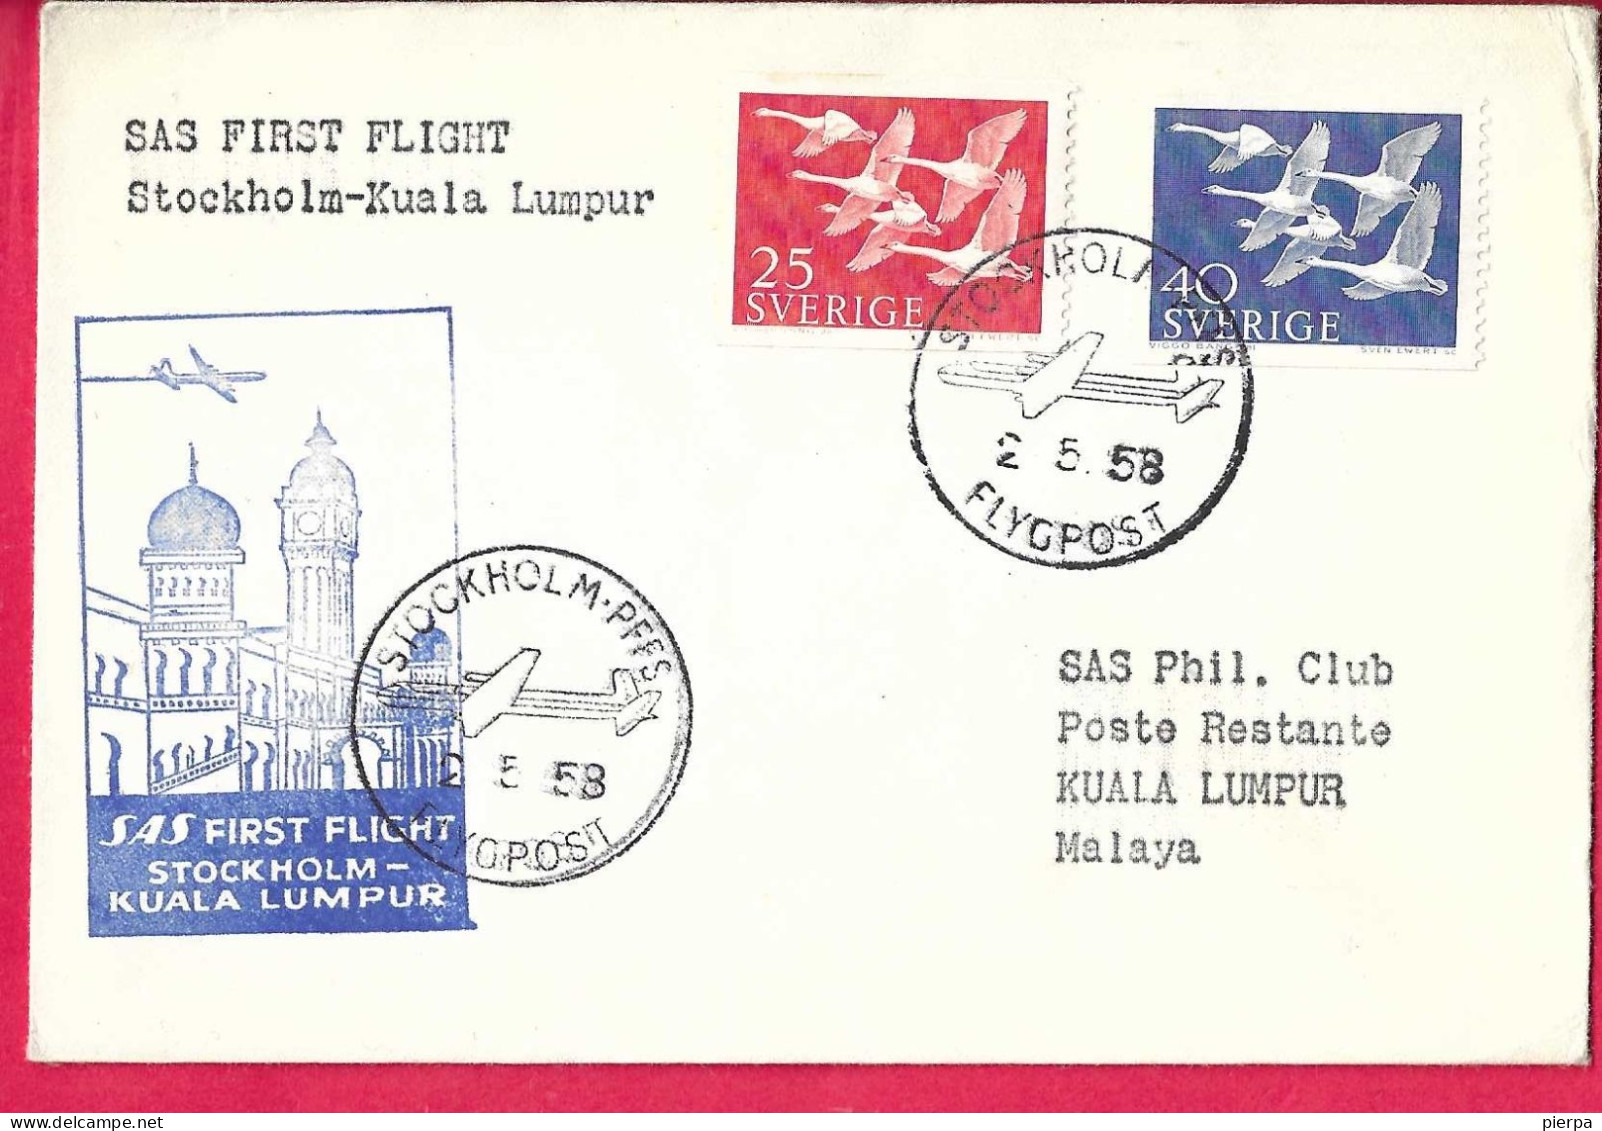 SVERIGE - FIRST FLIGHT S.A.S. FROM STOCKHOLM TO KUALA LUMPUR* 2.5.58* ON OFFICIAL COVER - Brieven En Documenten